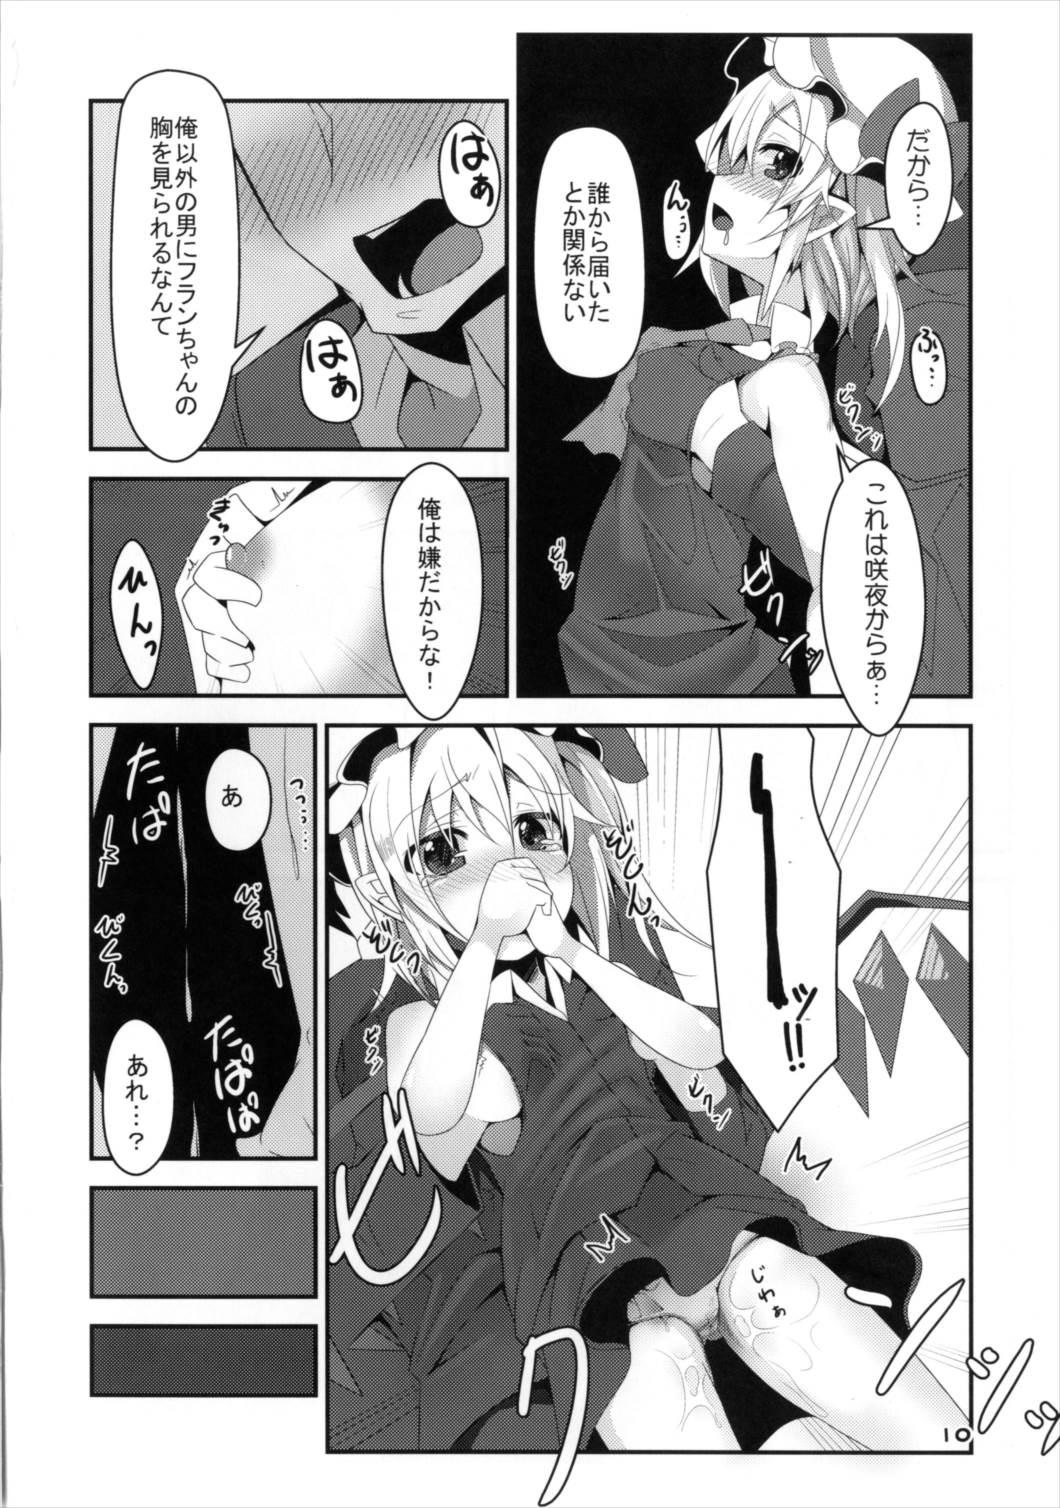 Gros Seins FLAN-CHAN COOL BIZ - Touhou project Old And Young - Page 9